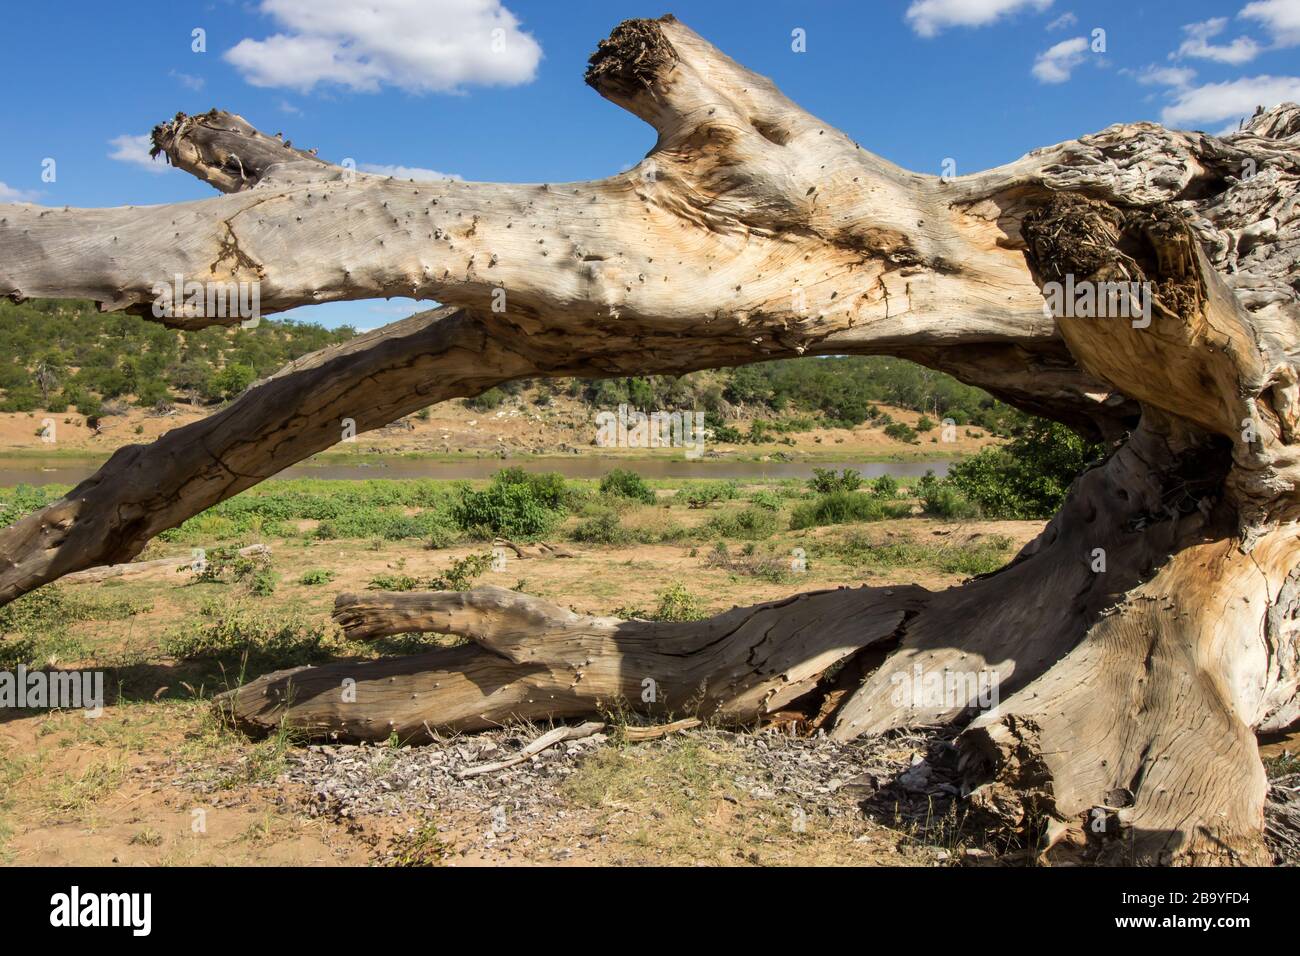 Old, weathered, dead tree trunk of a wild fig tree, washed up by a flood on the banks of the Olifants River in the Kruger National Park, South Africa Stock Photo